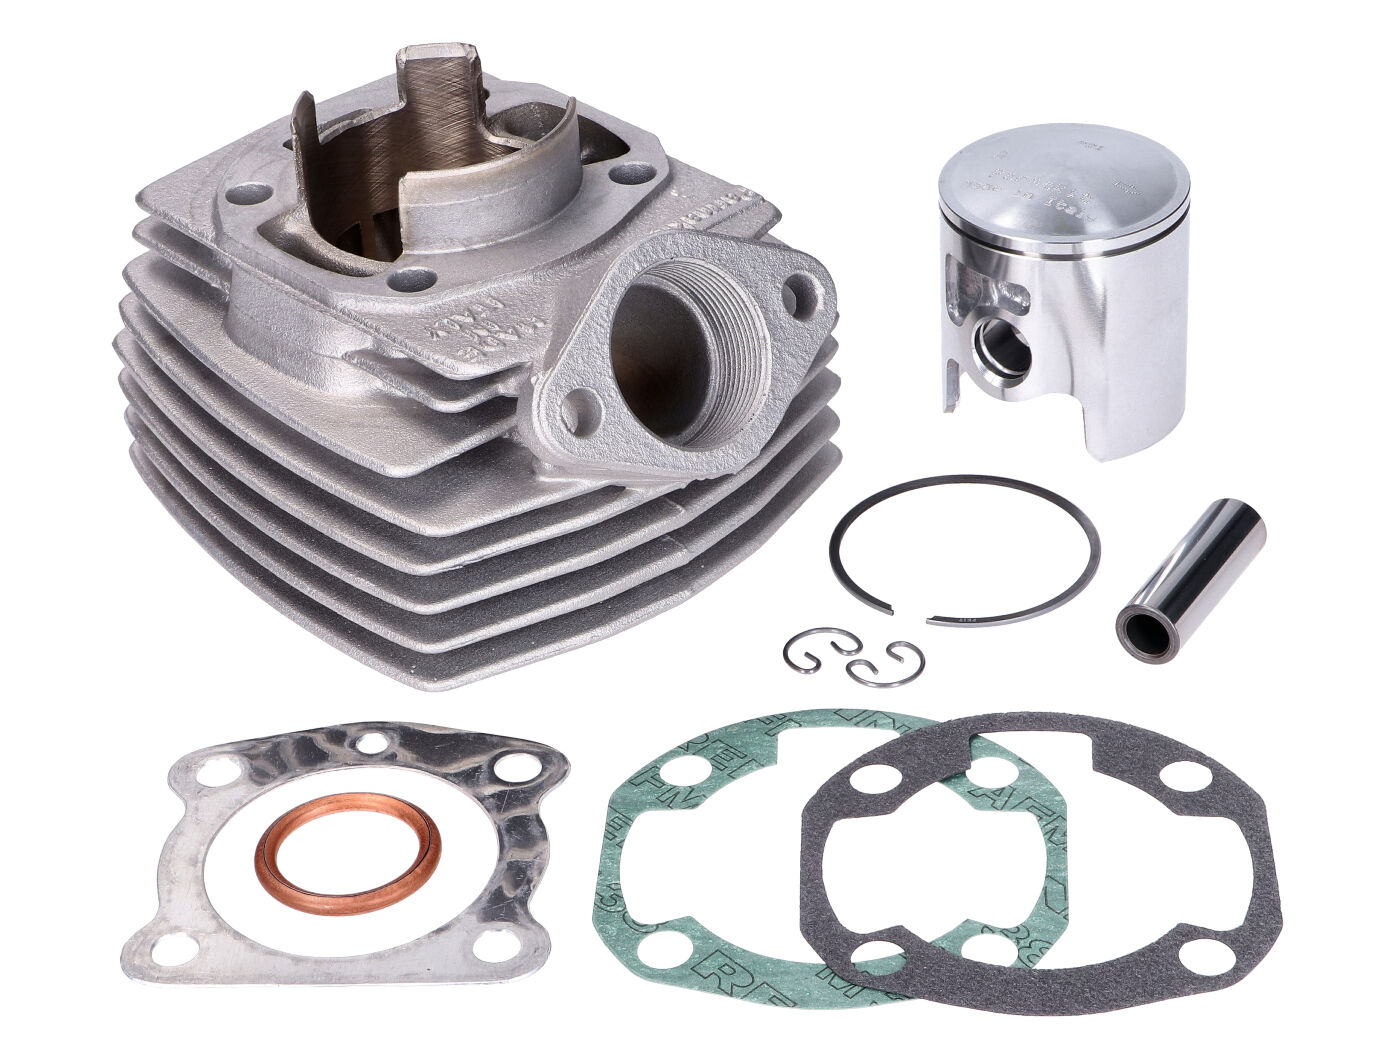 Cylinder Kit Parmakit 70cc, 46mm for Peugeot Moped 103-105, RCX AC 50